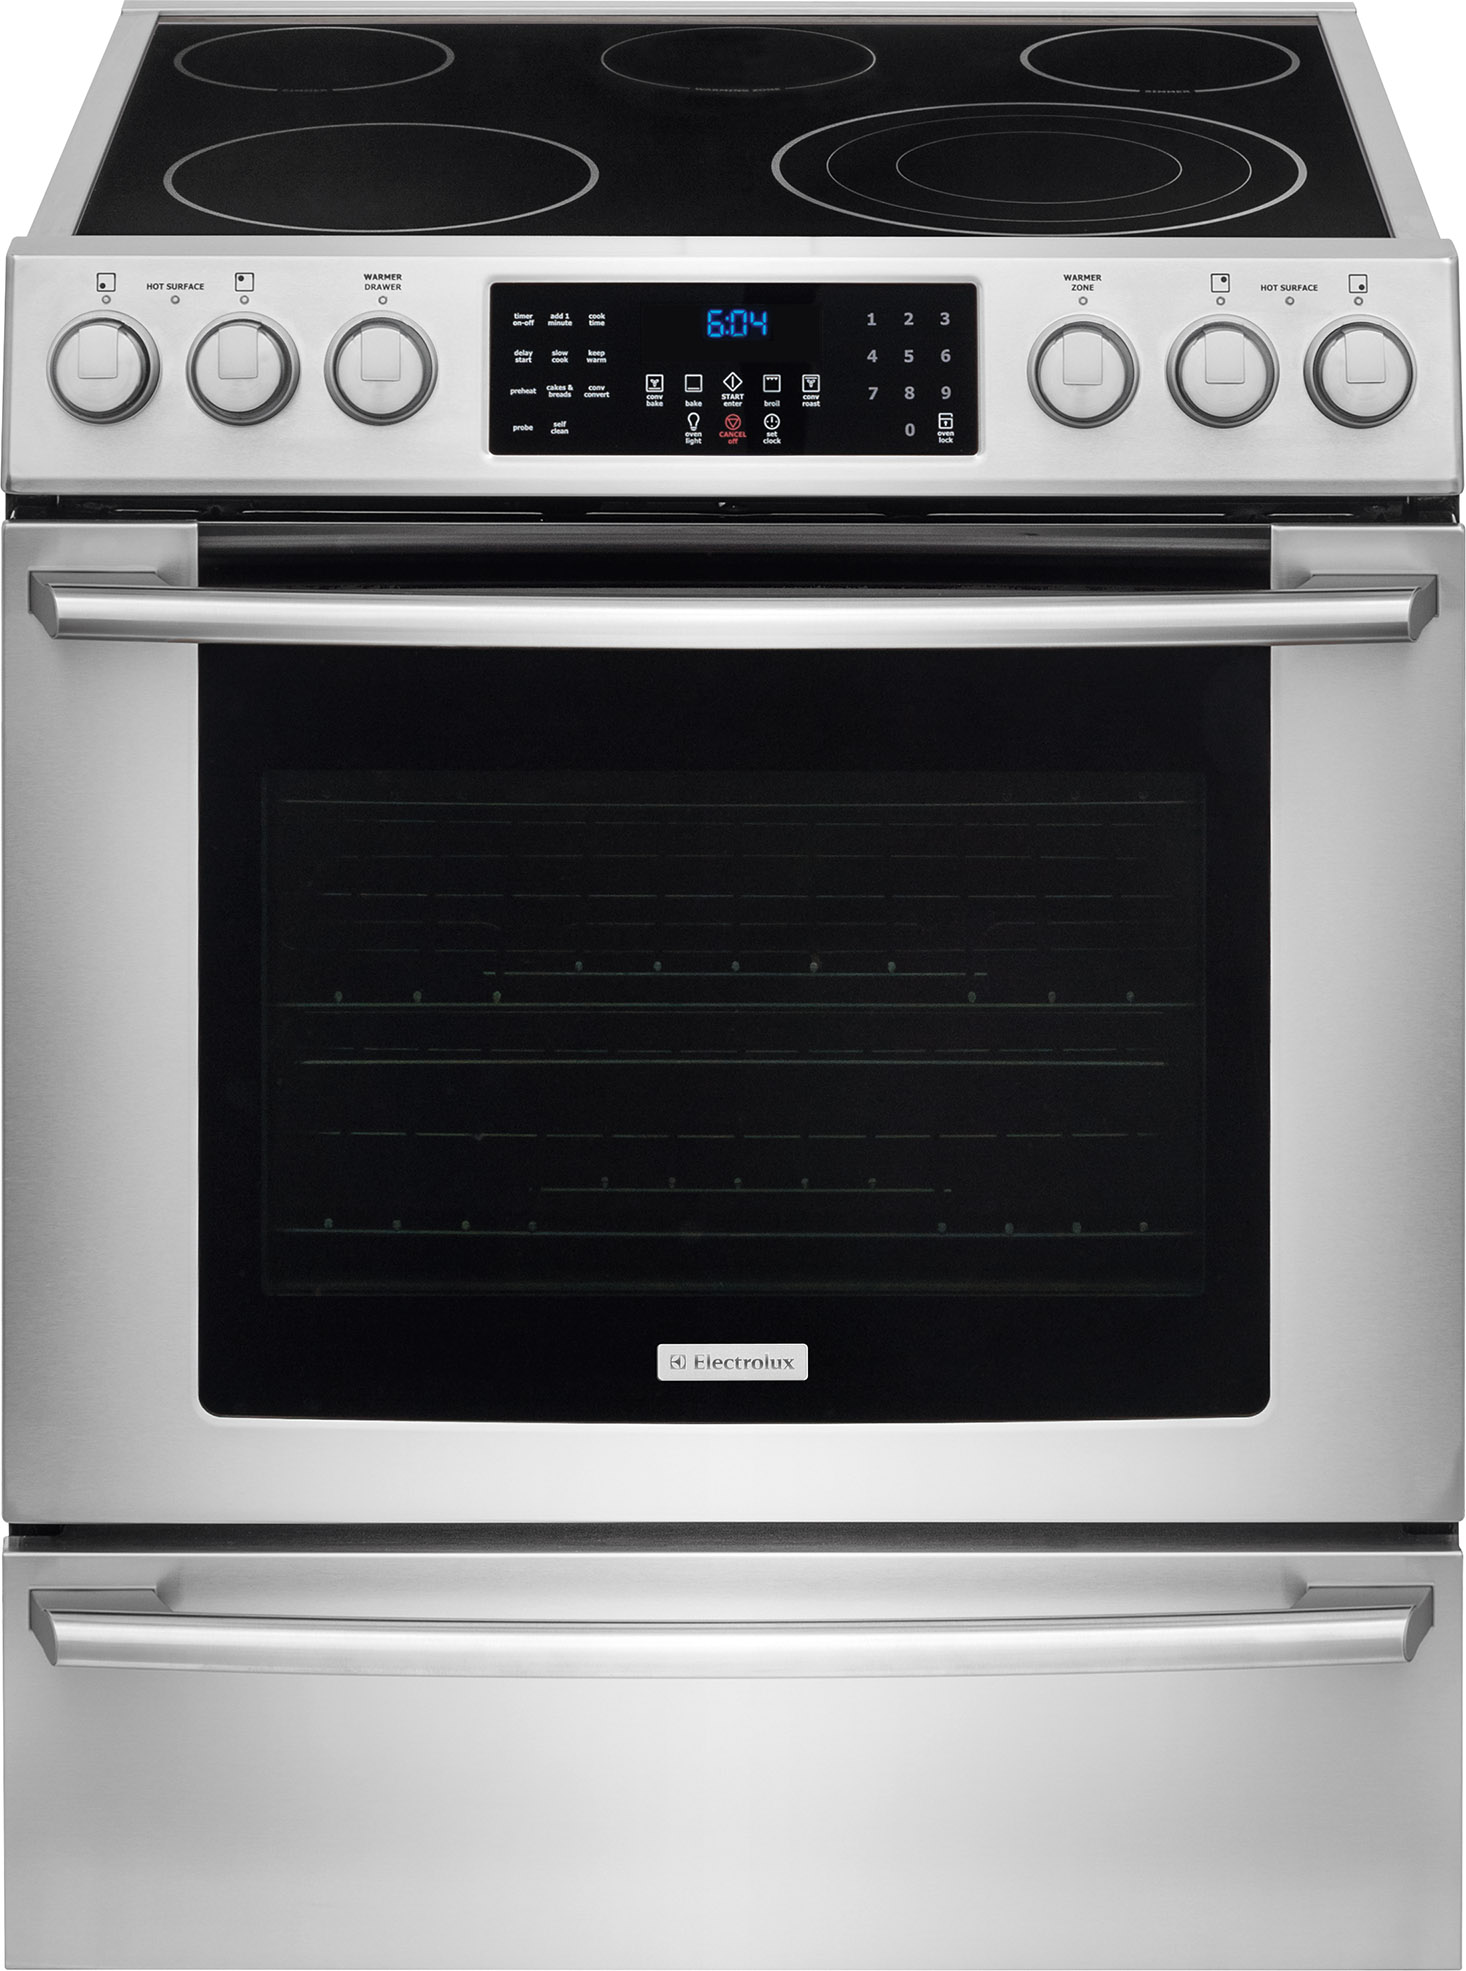 Electrolux 30" Stainless Steel Slide In Electric Range